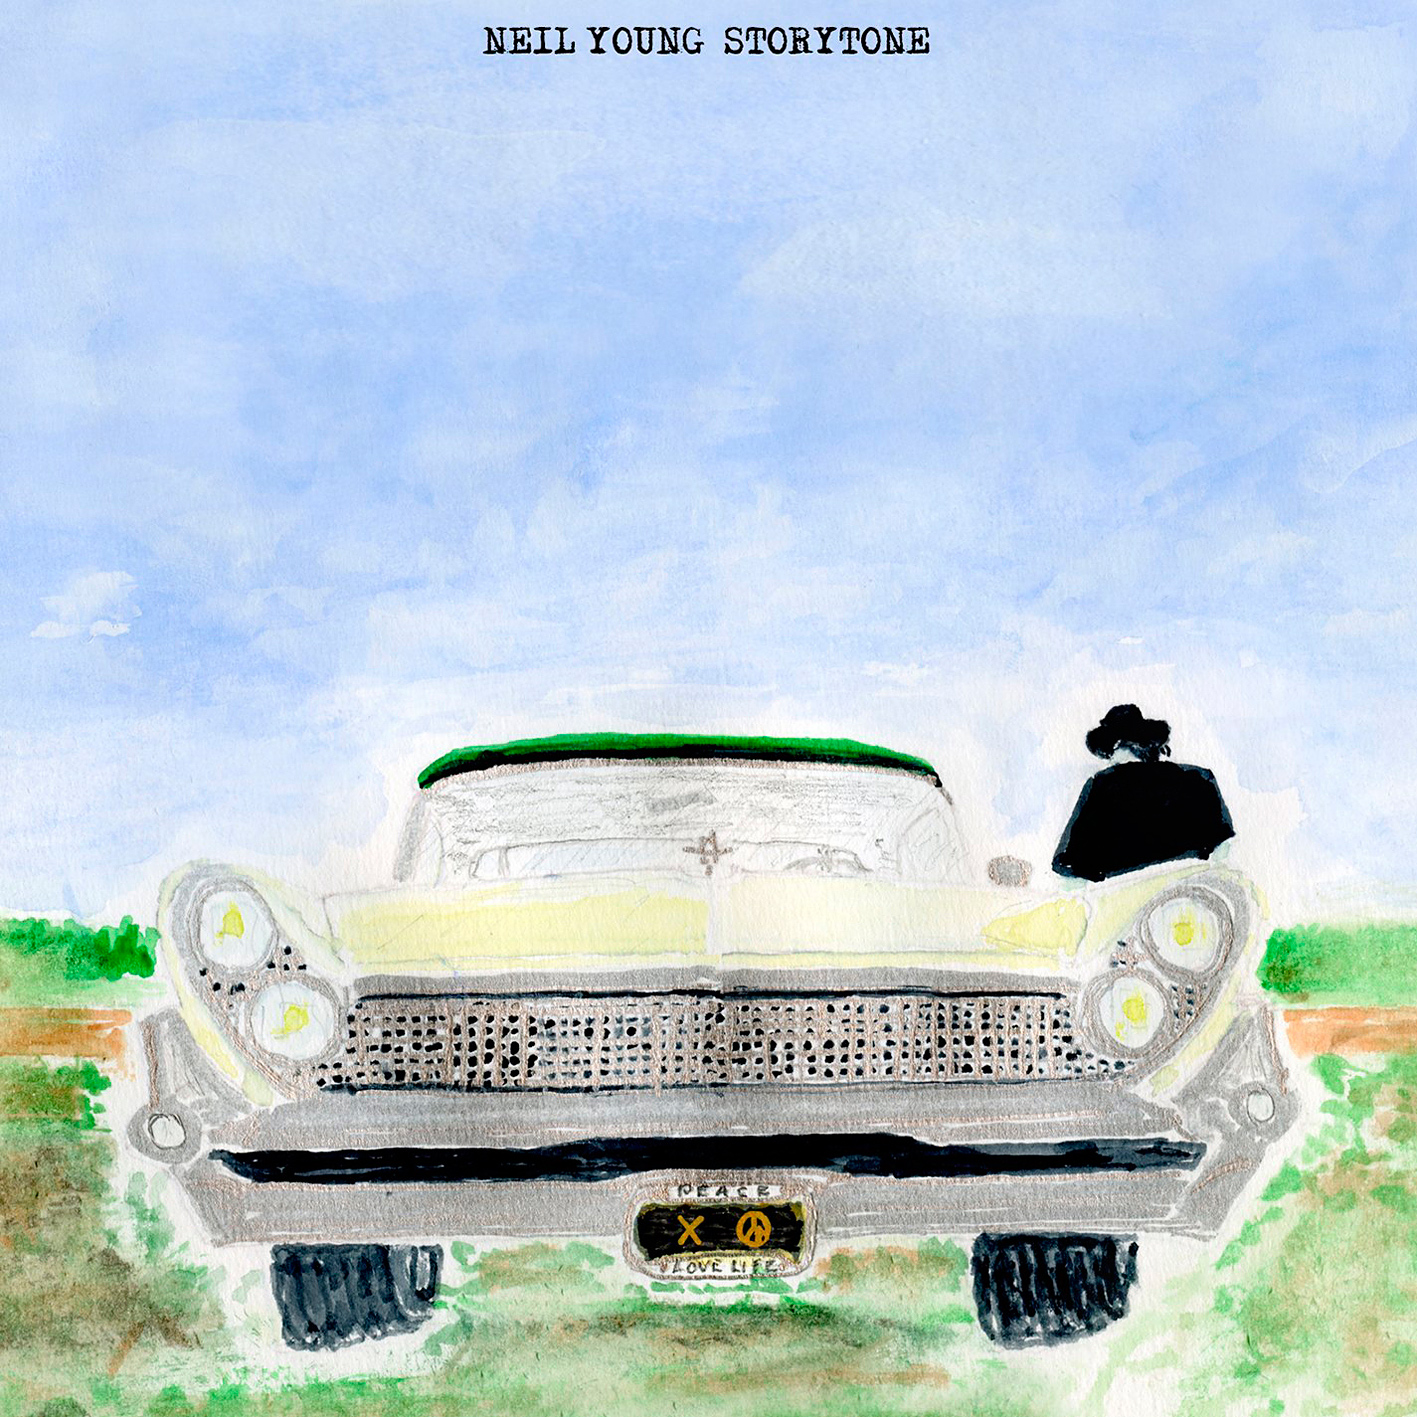 Neil Young - 2014 - Storytone Deluxe Edition [2014 HDtracks] 24-192